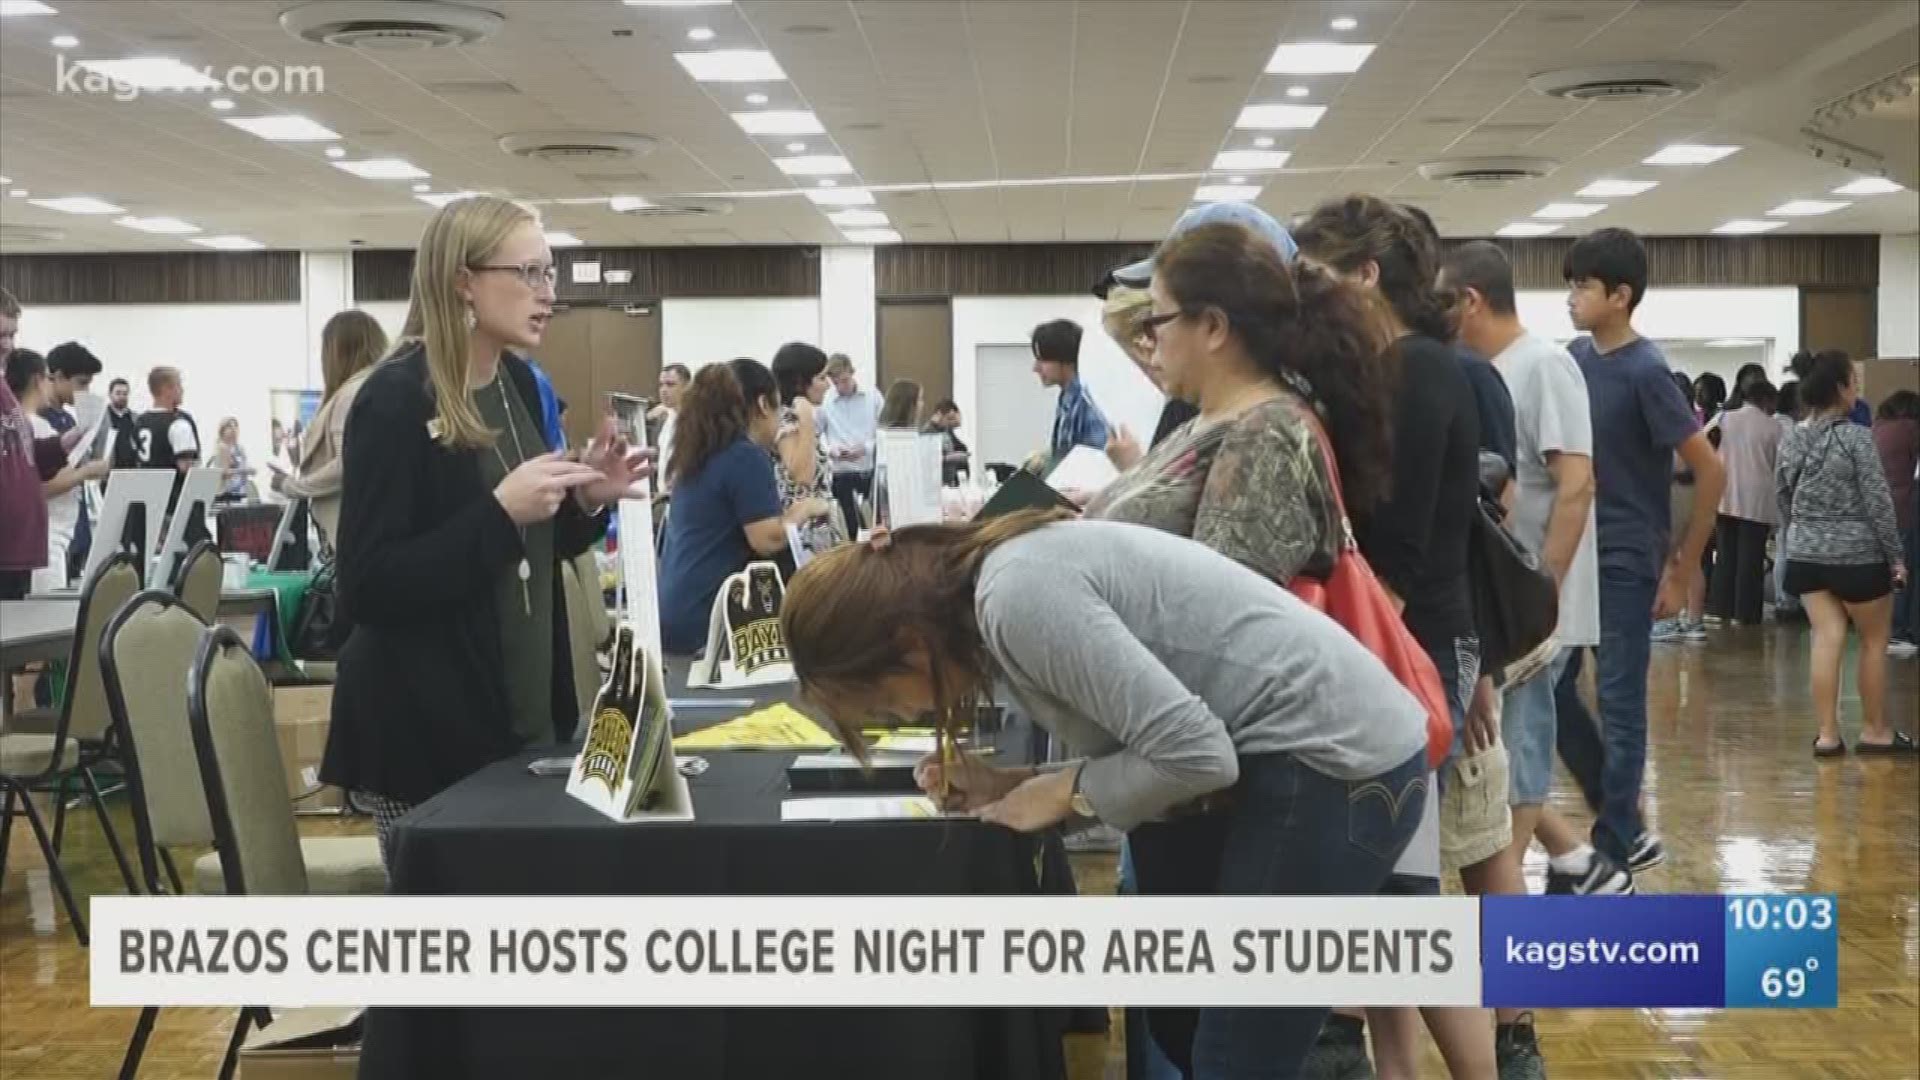 College Night is a way for students to speak to colleges and learn more about them without having to spend the time and money to visit every single one.